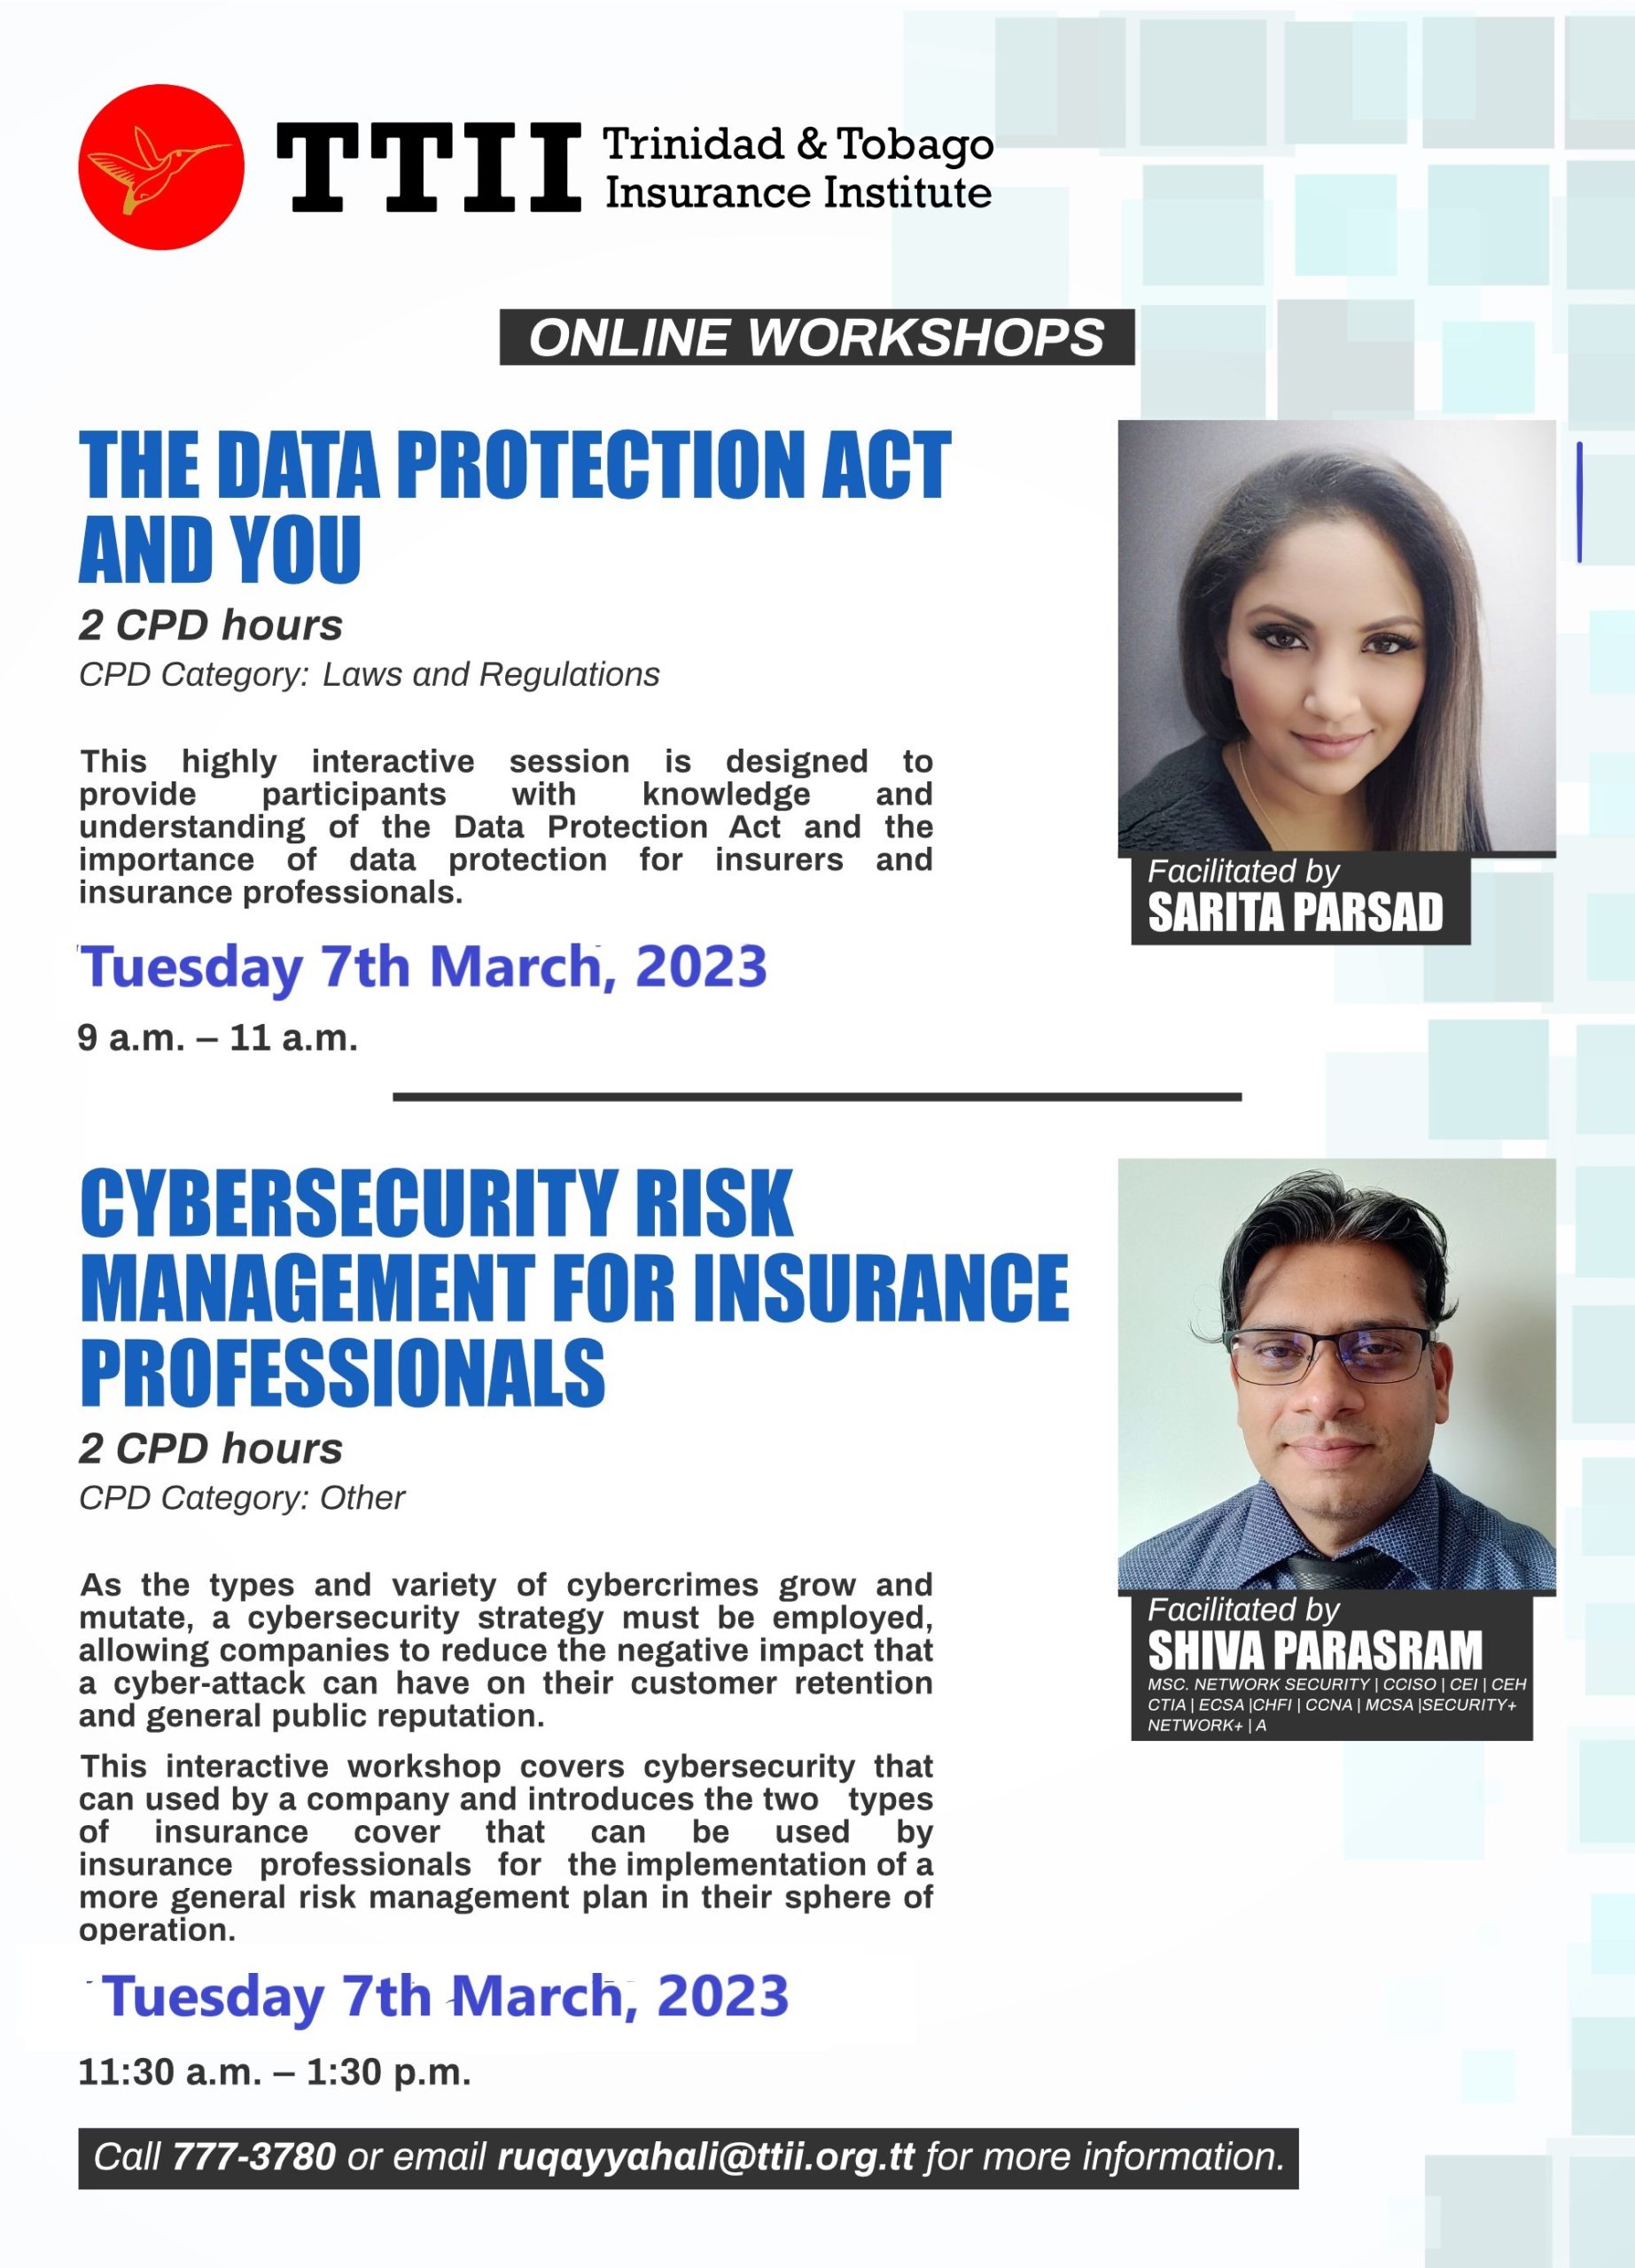 The Data Protection Act and You/Cyber Security Risk Management for Insurance Professionals